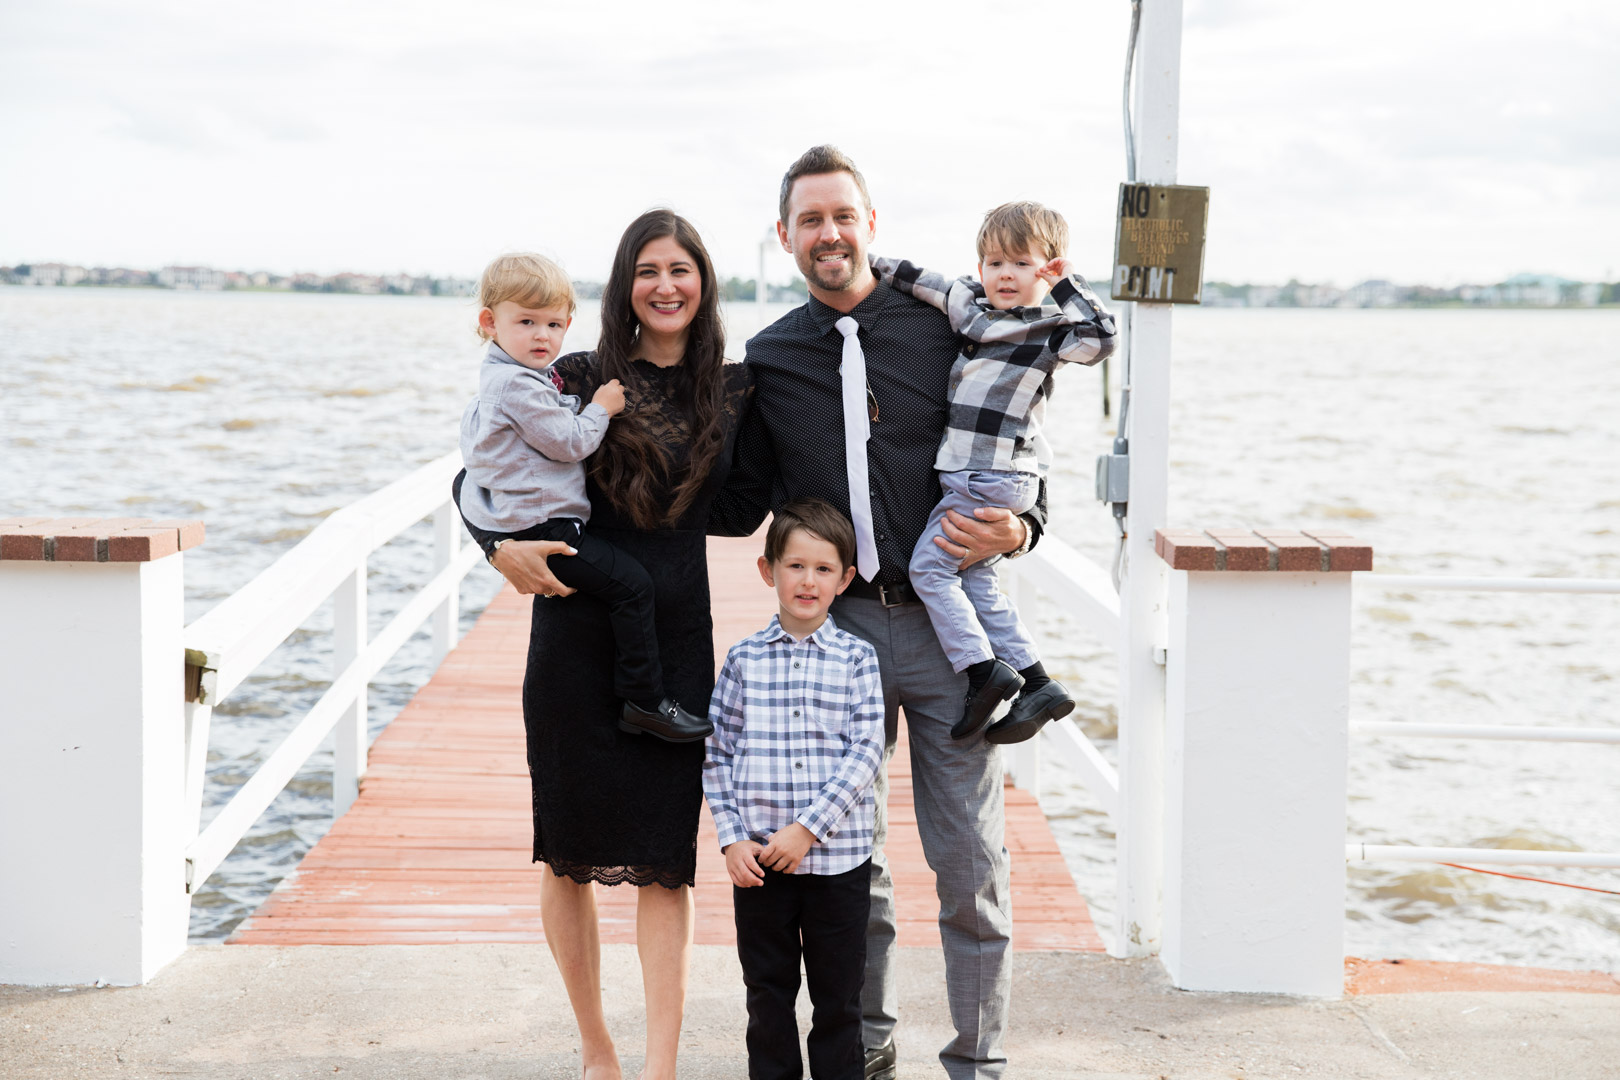 Fall family style: Wedding guest edition | The Fashionable Maven